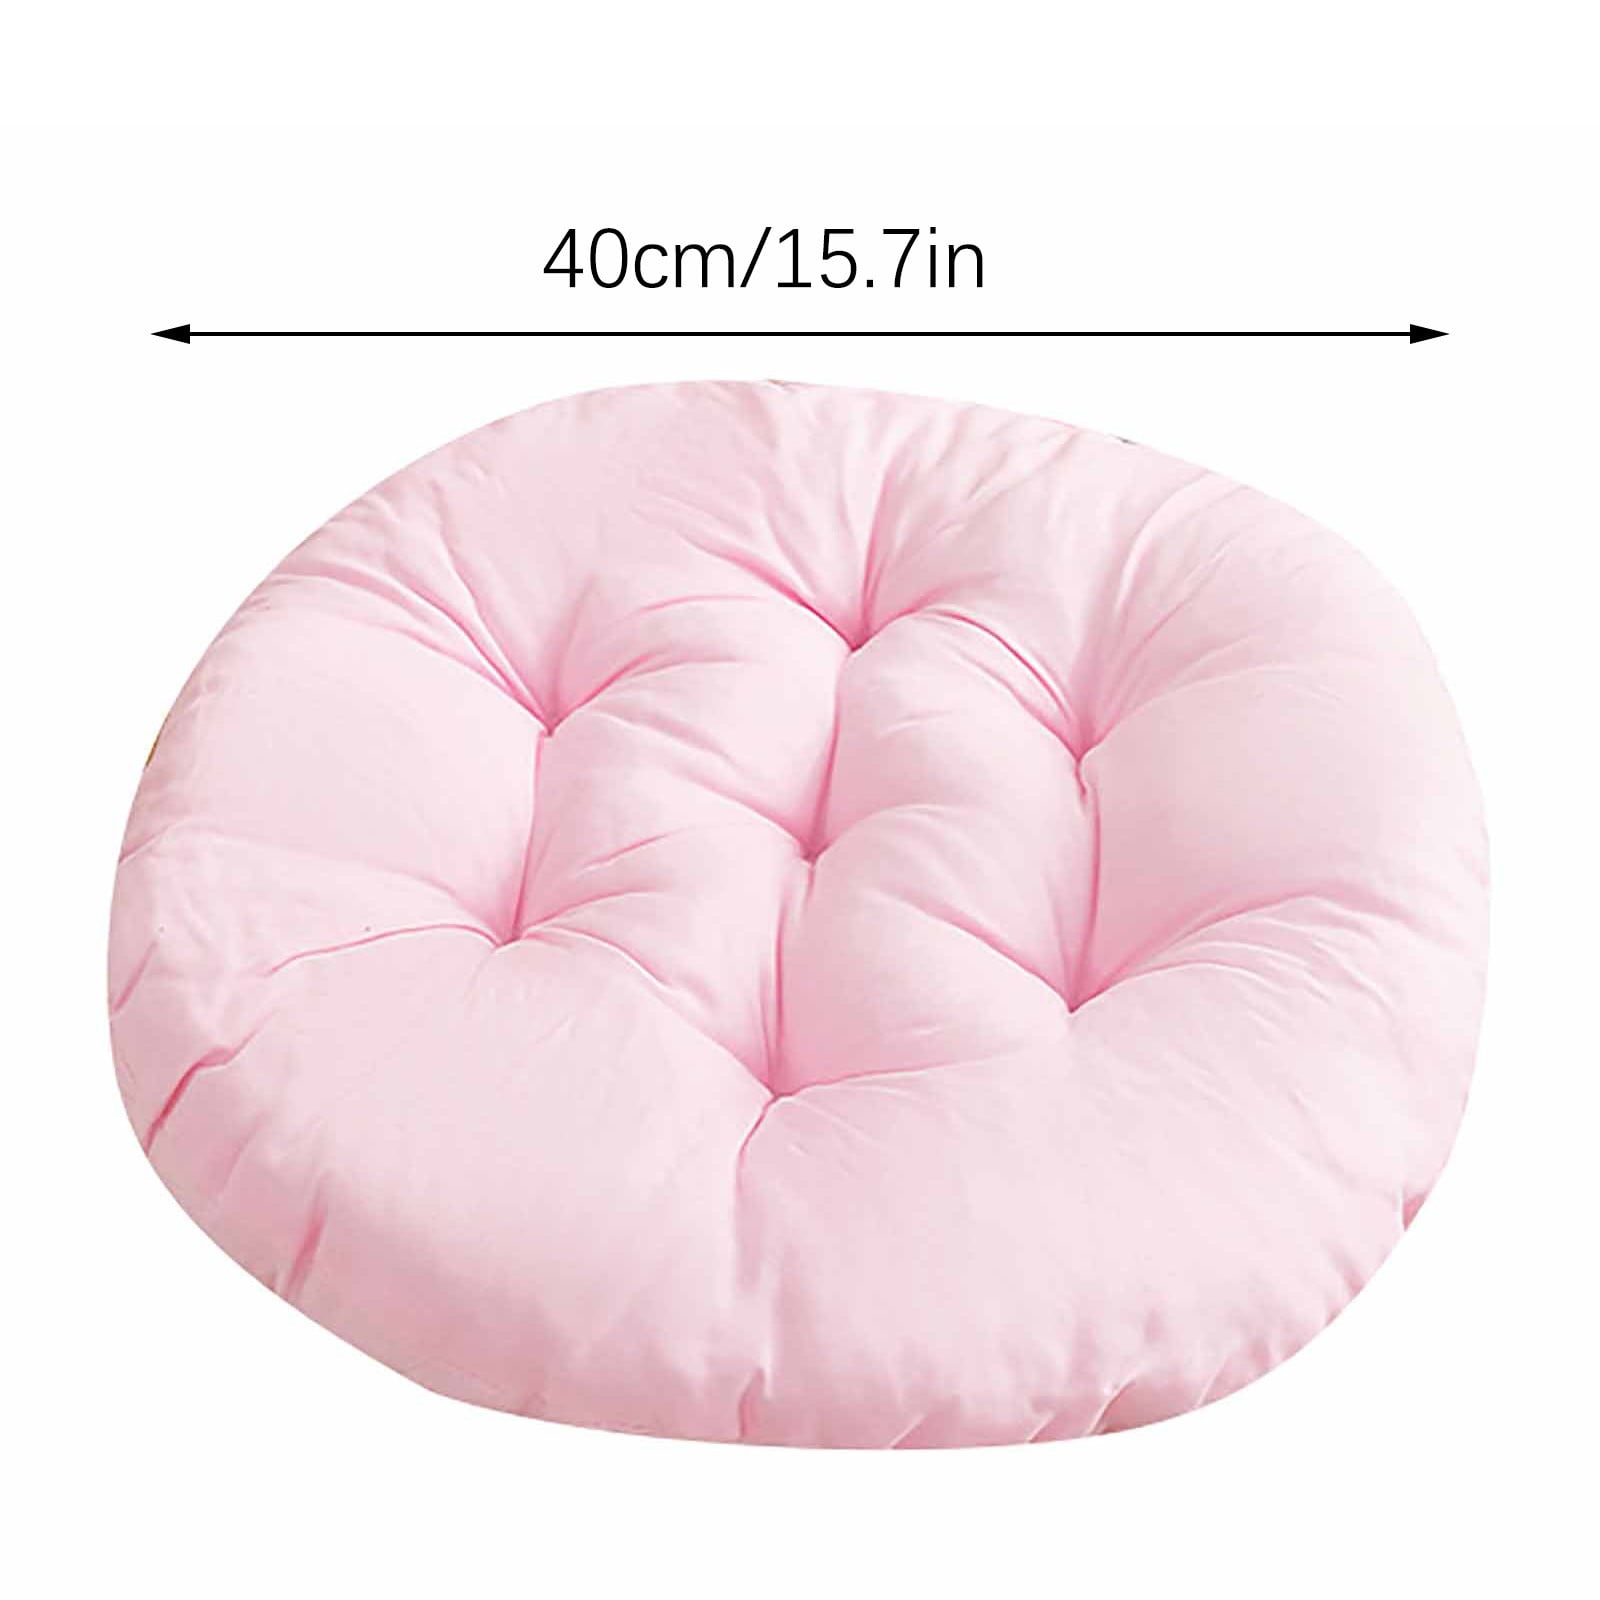 Round Seat Cushion Chair Pad Dining Chair Seat Wrinkle Seat Floor Cushions  - China Cushion and Outdoor Cushion price